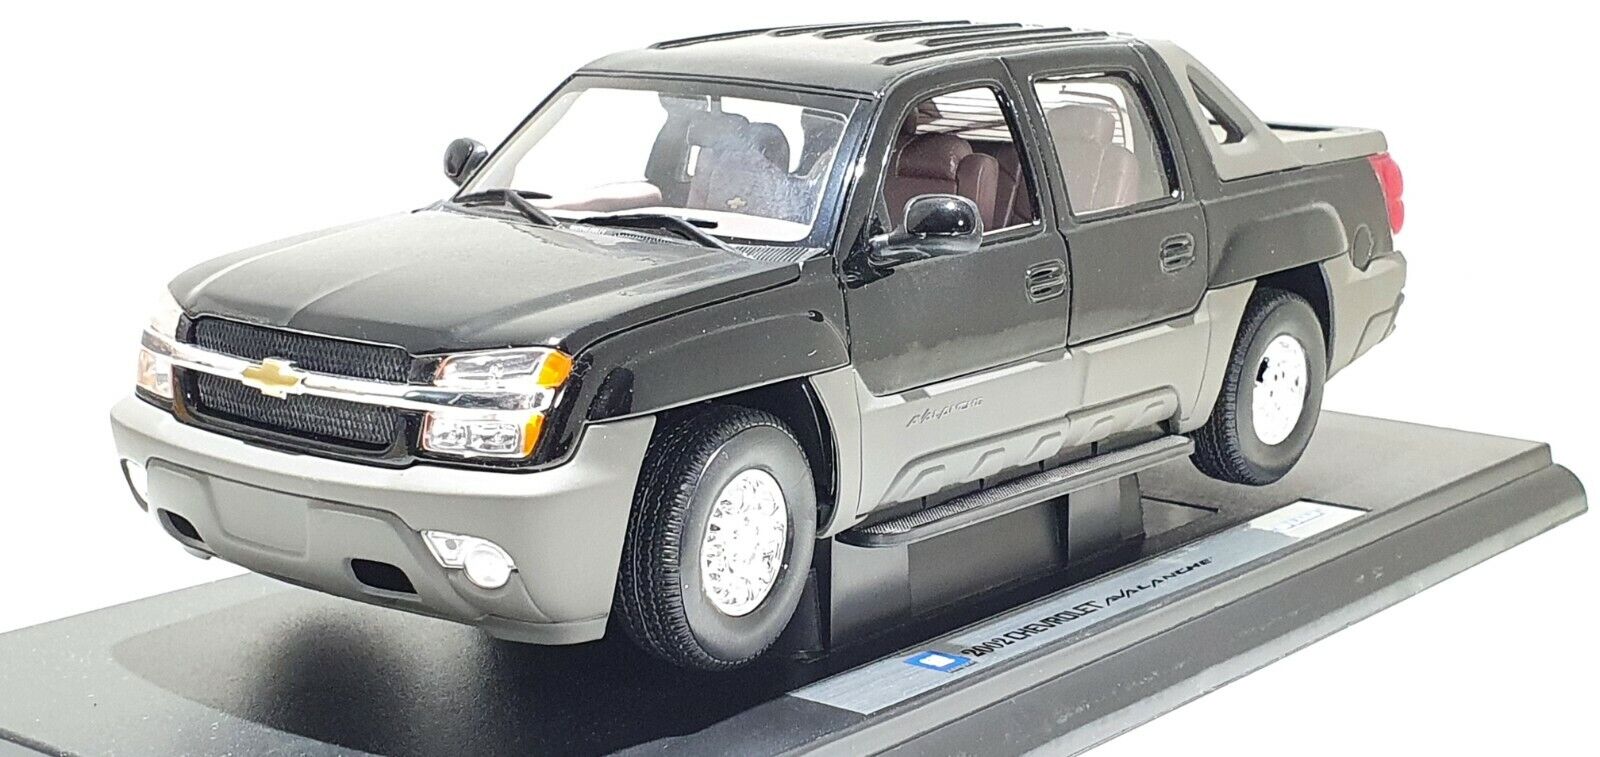 1/18 Welly CHEVY CHEVROLET AVALANCHE BLACK diecast pick up truck car Model  | eBay